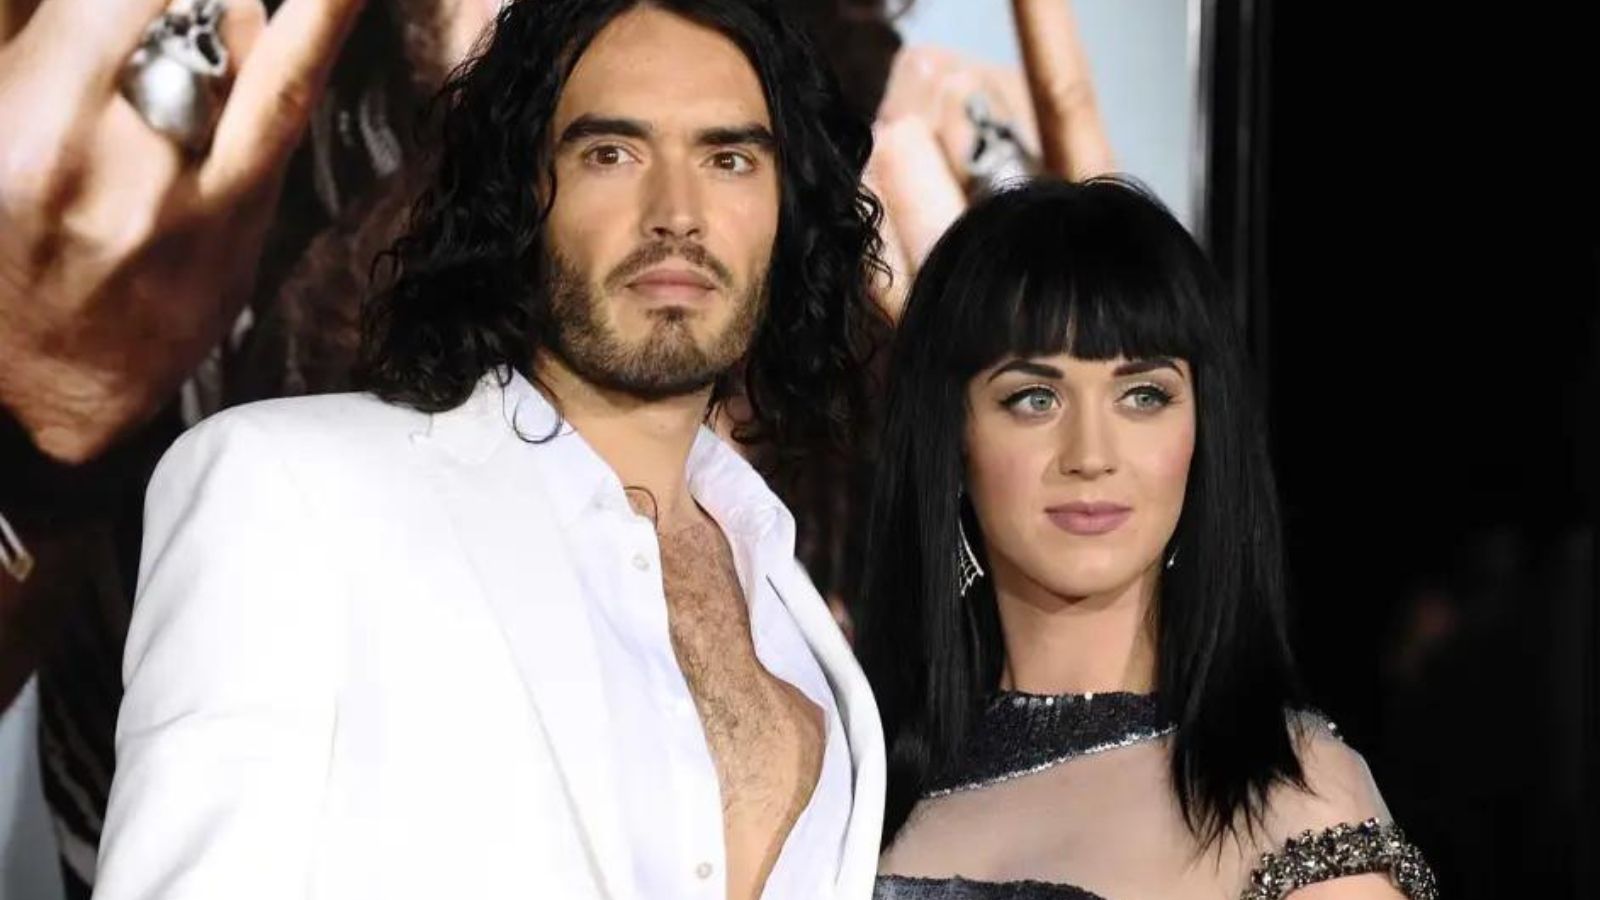 Russell Brand and Katy Perry's quick wedding: 'It was a chaotic time and I felt out of touch'